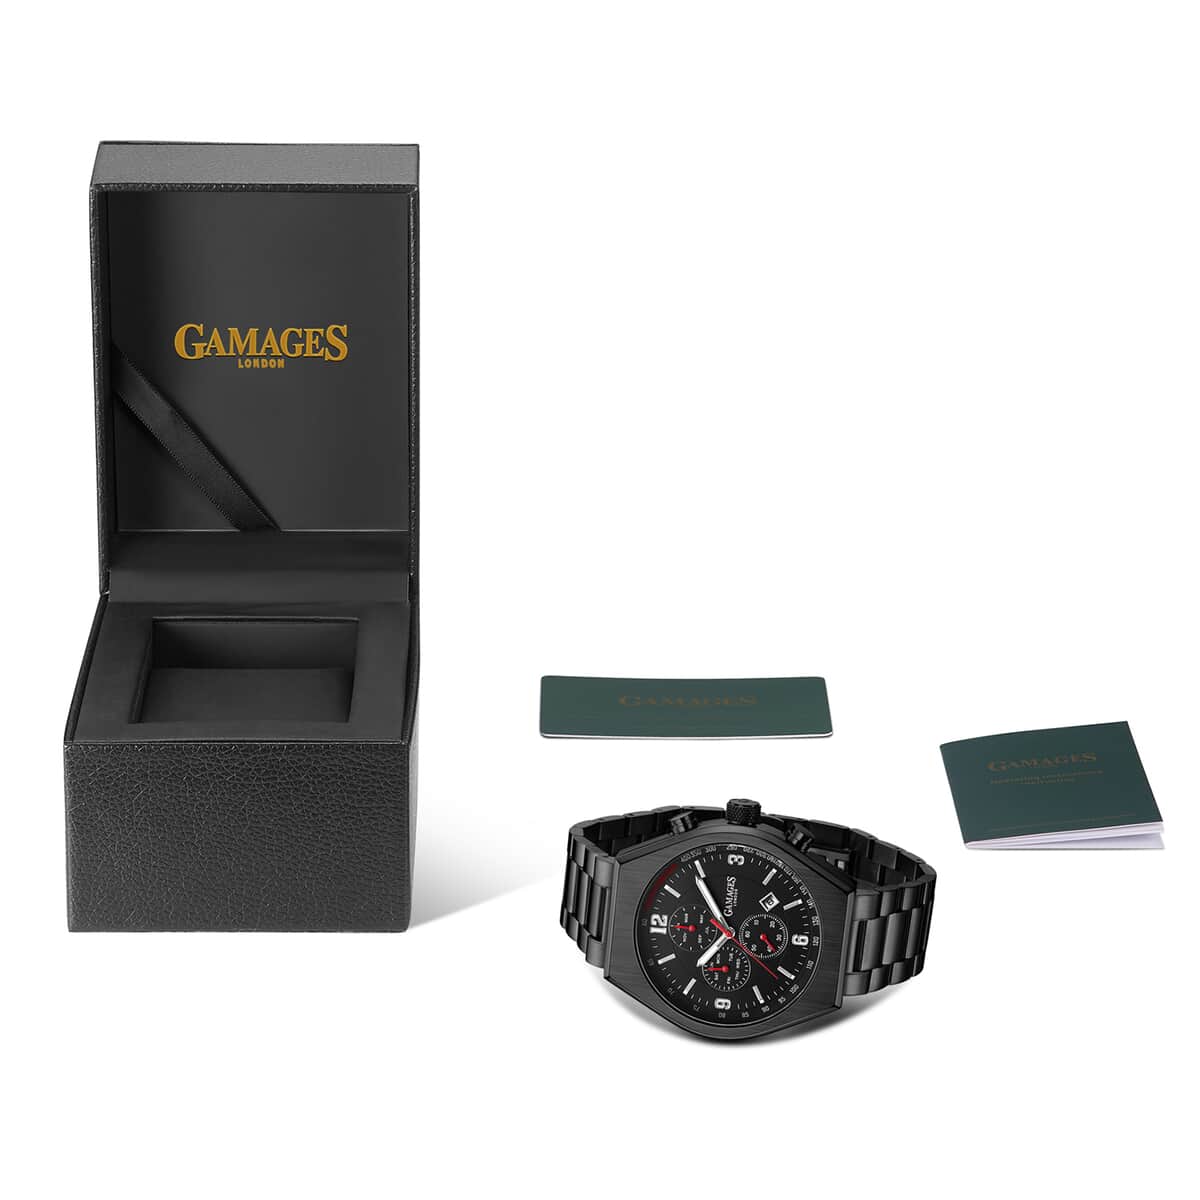 GAMAGES OF LONDON Limited Edition Hand Assembled Enterprise Automatic Movement Watch in ION Plated Black Stainless Steel (45mm) with FREE GIFT PEN image number 5